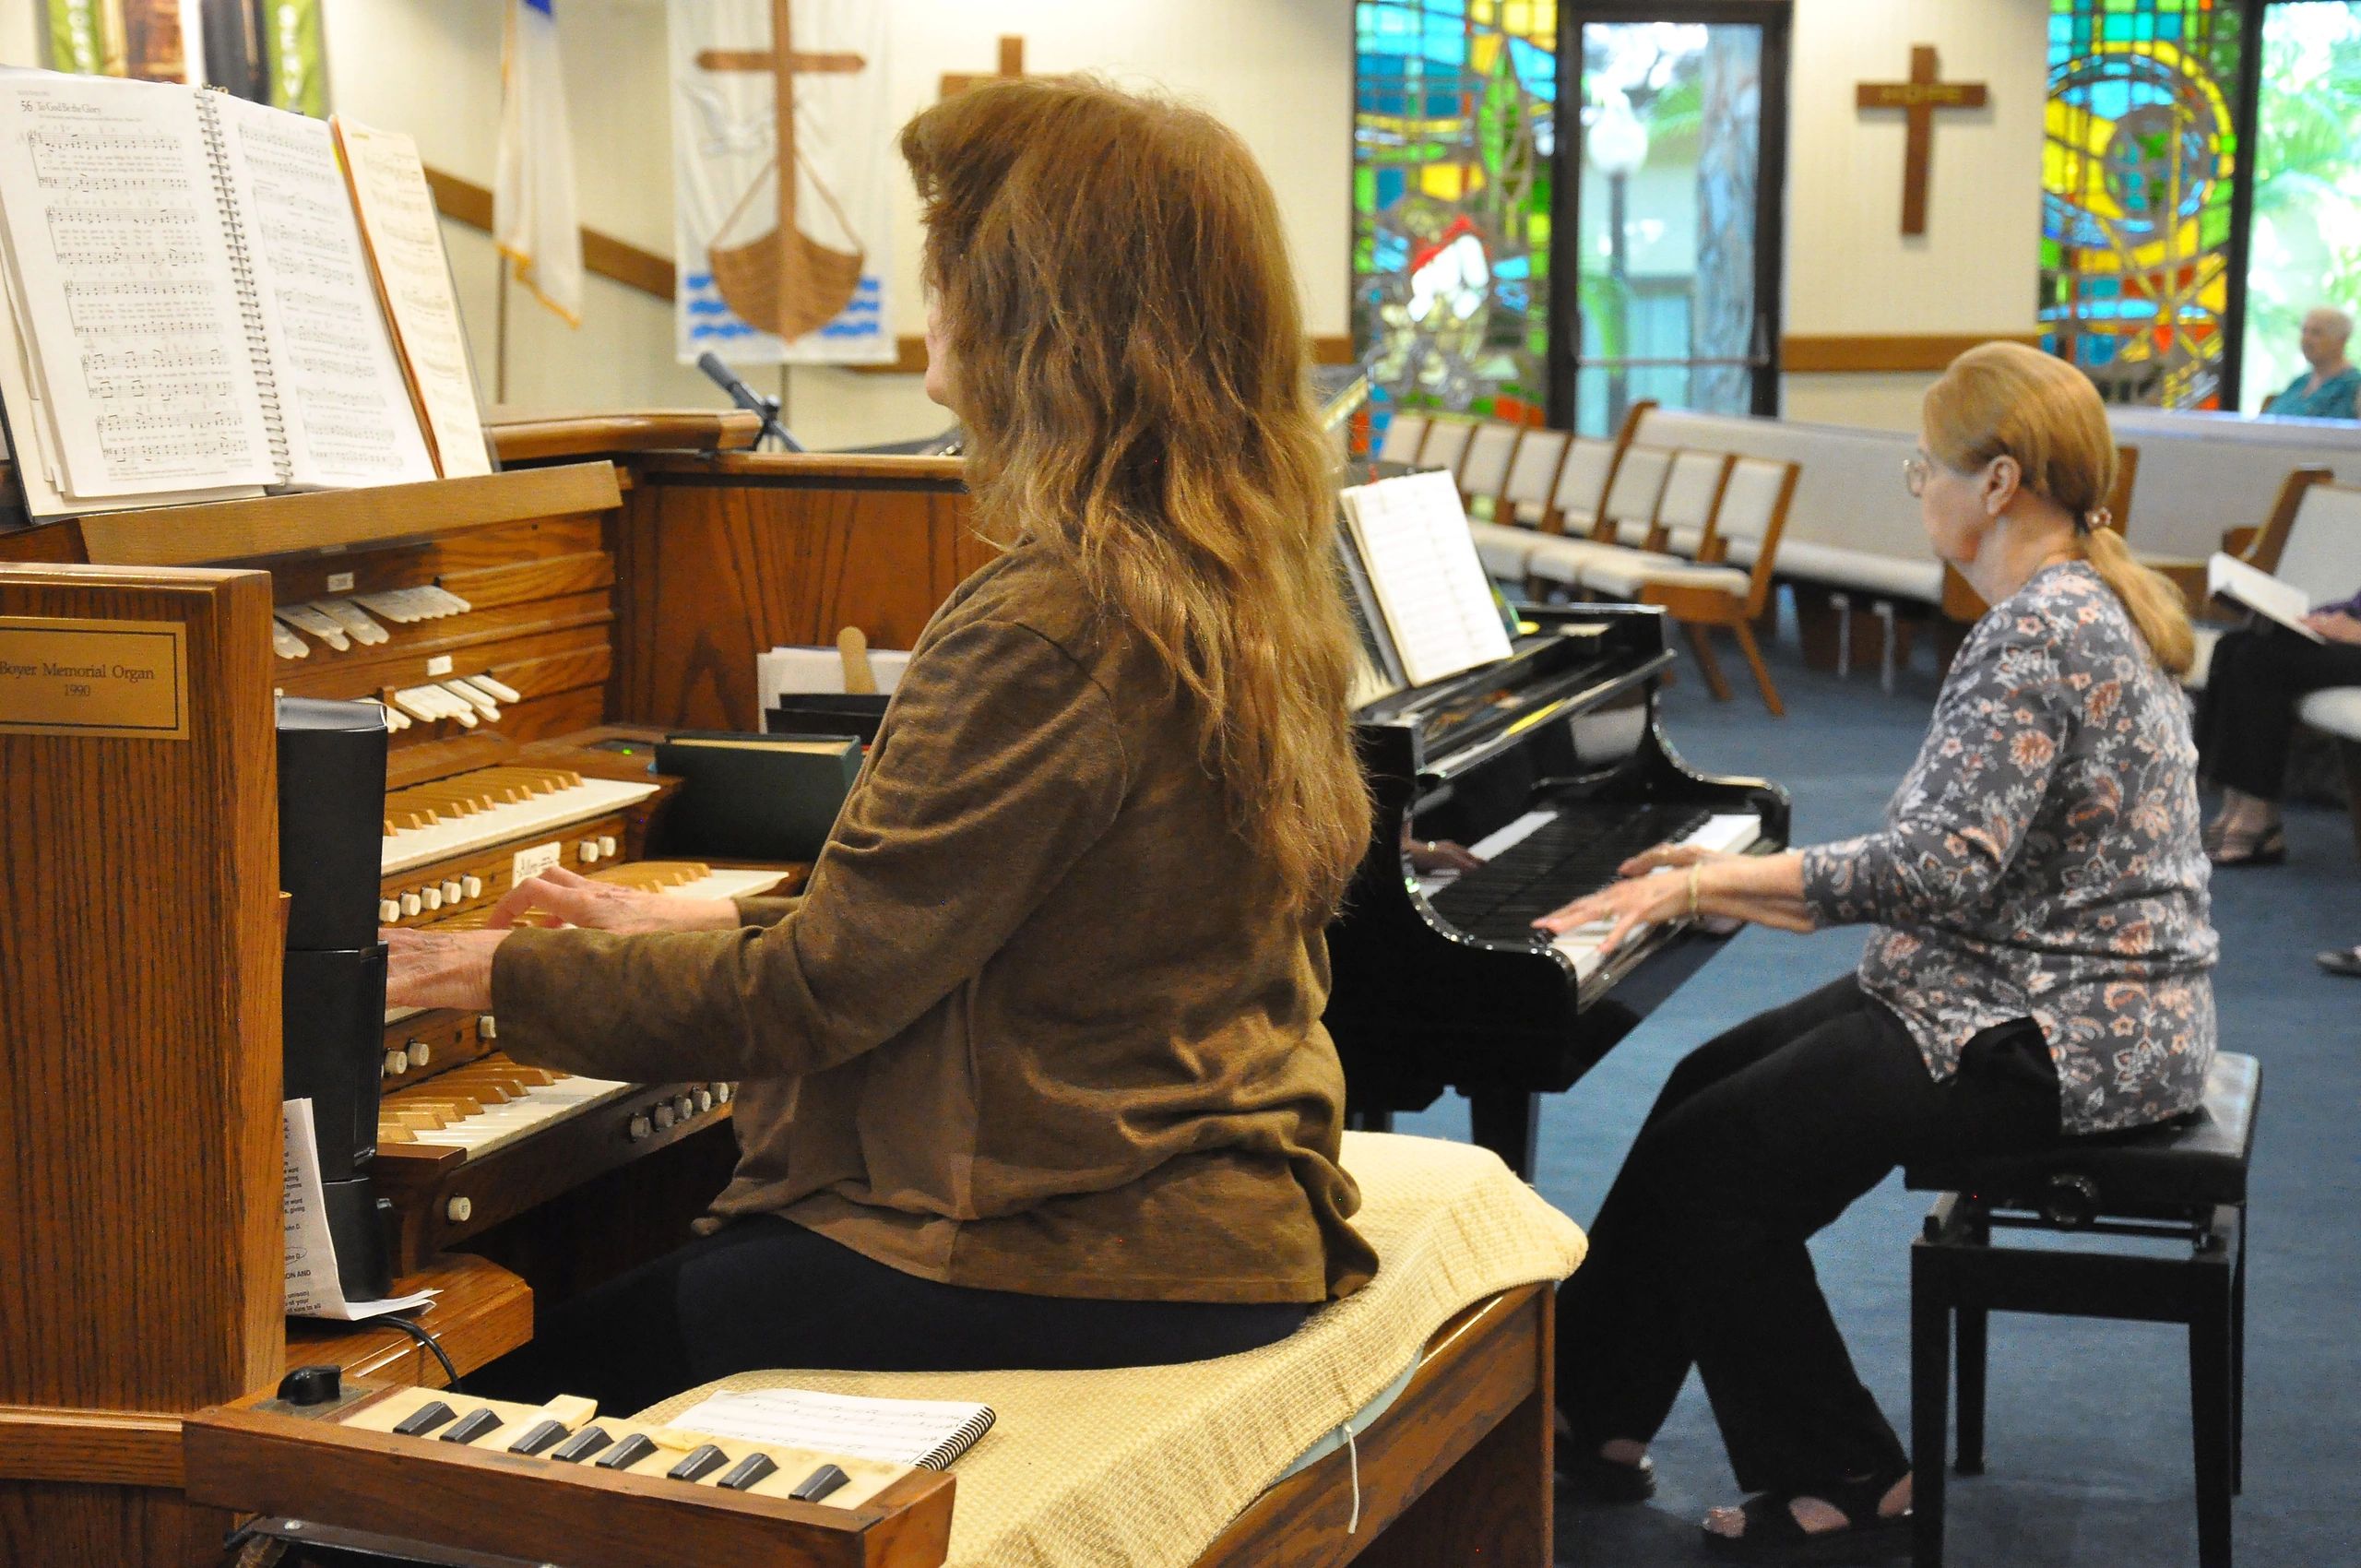 Our organist, Desiree Little and our pianist, Cathy Good.